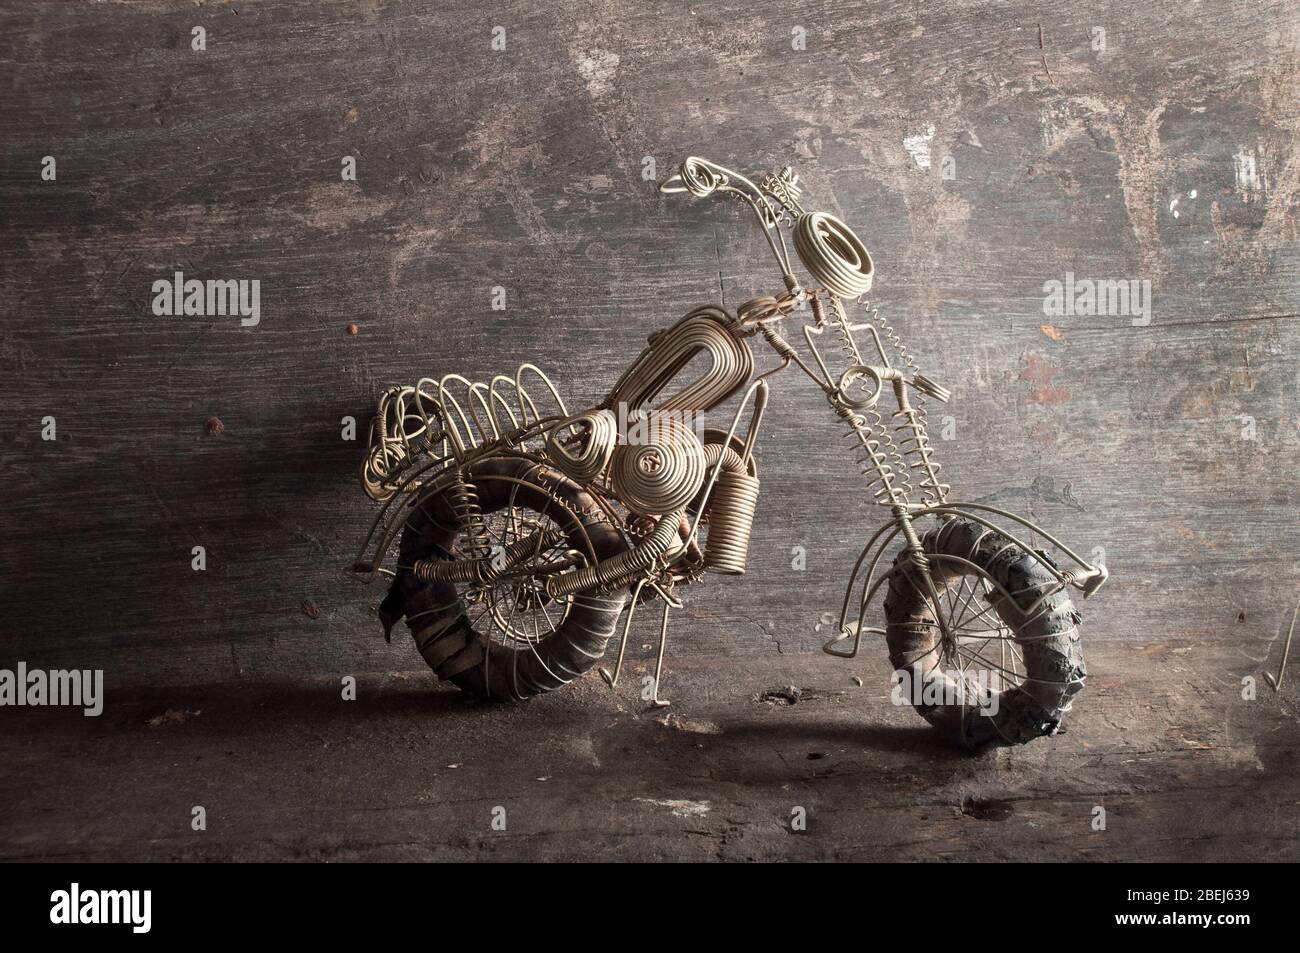 Hand made wire model of a motor cycle from Malawi about 1989. About 35cms long Note rubber tires Studio shot on old dark wood background. Stock Photo